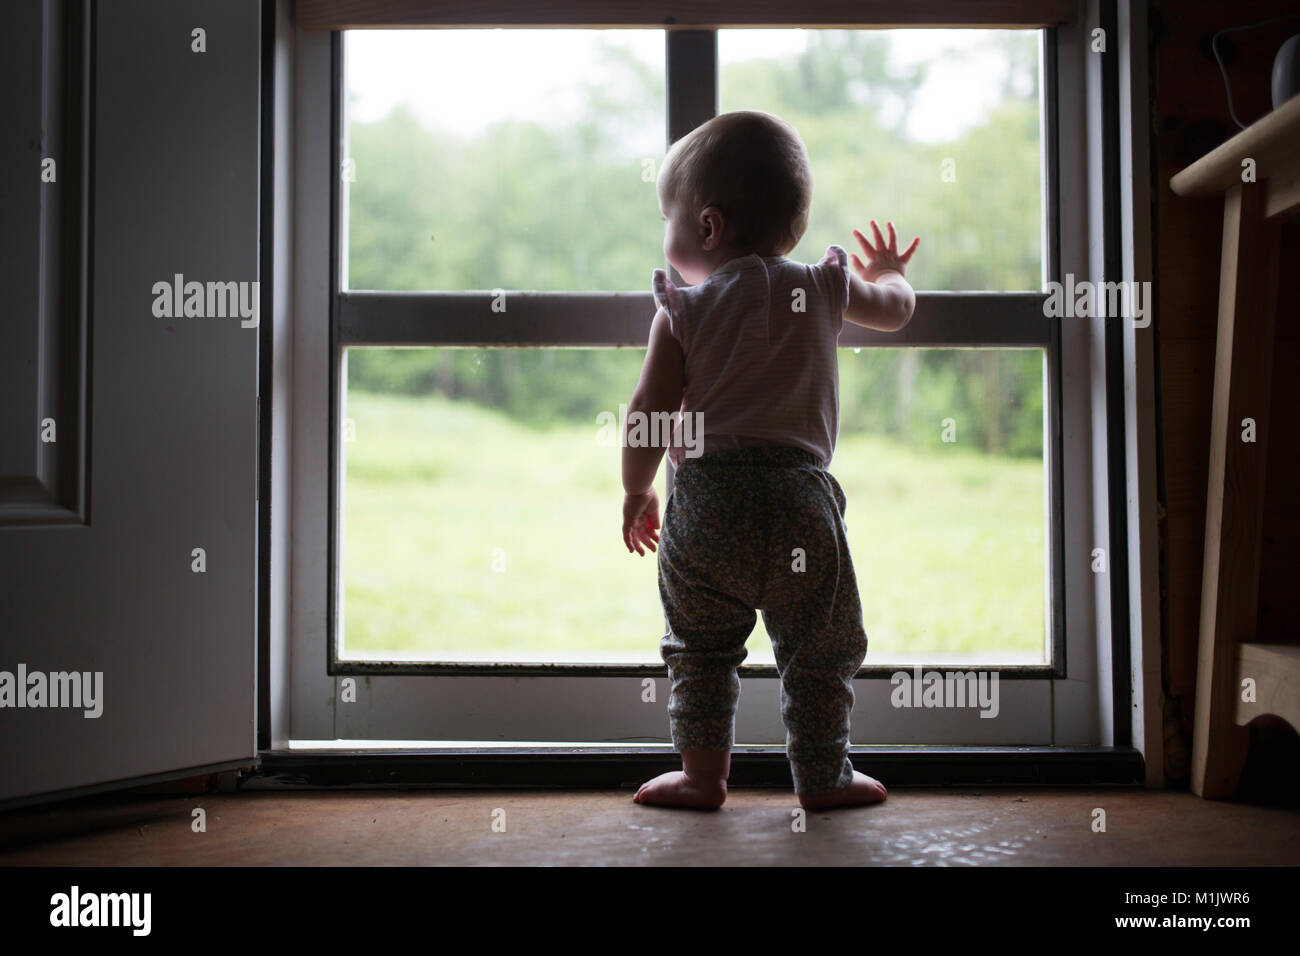 Rear View of Infant Child Standing at Screen Door Stock Photo